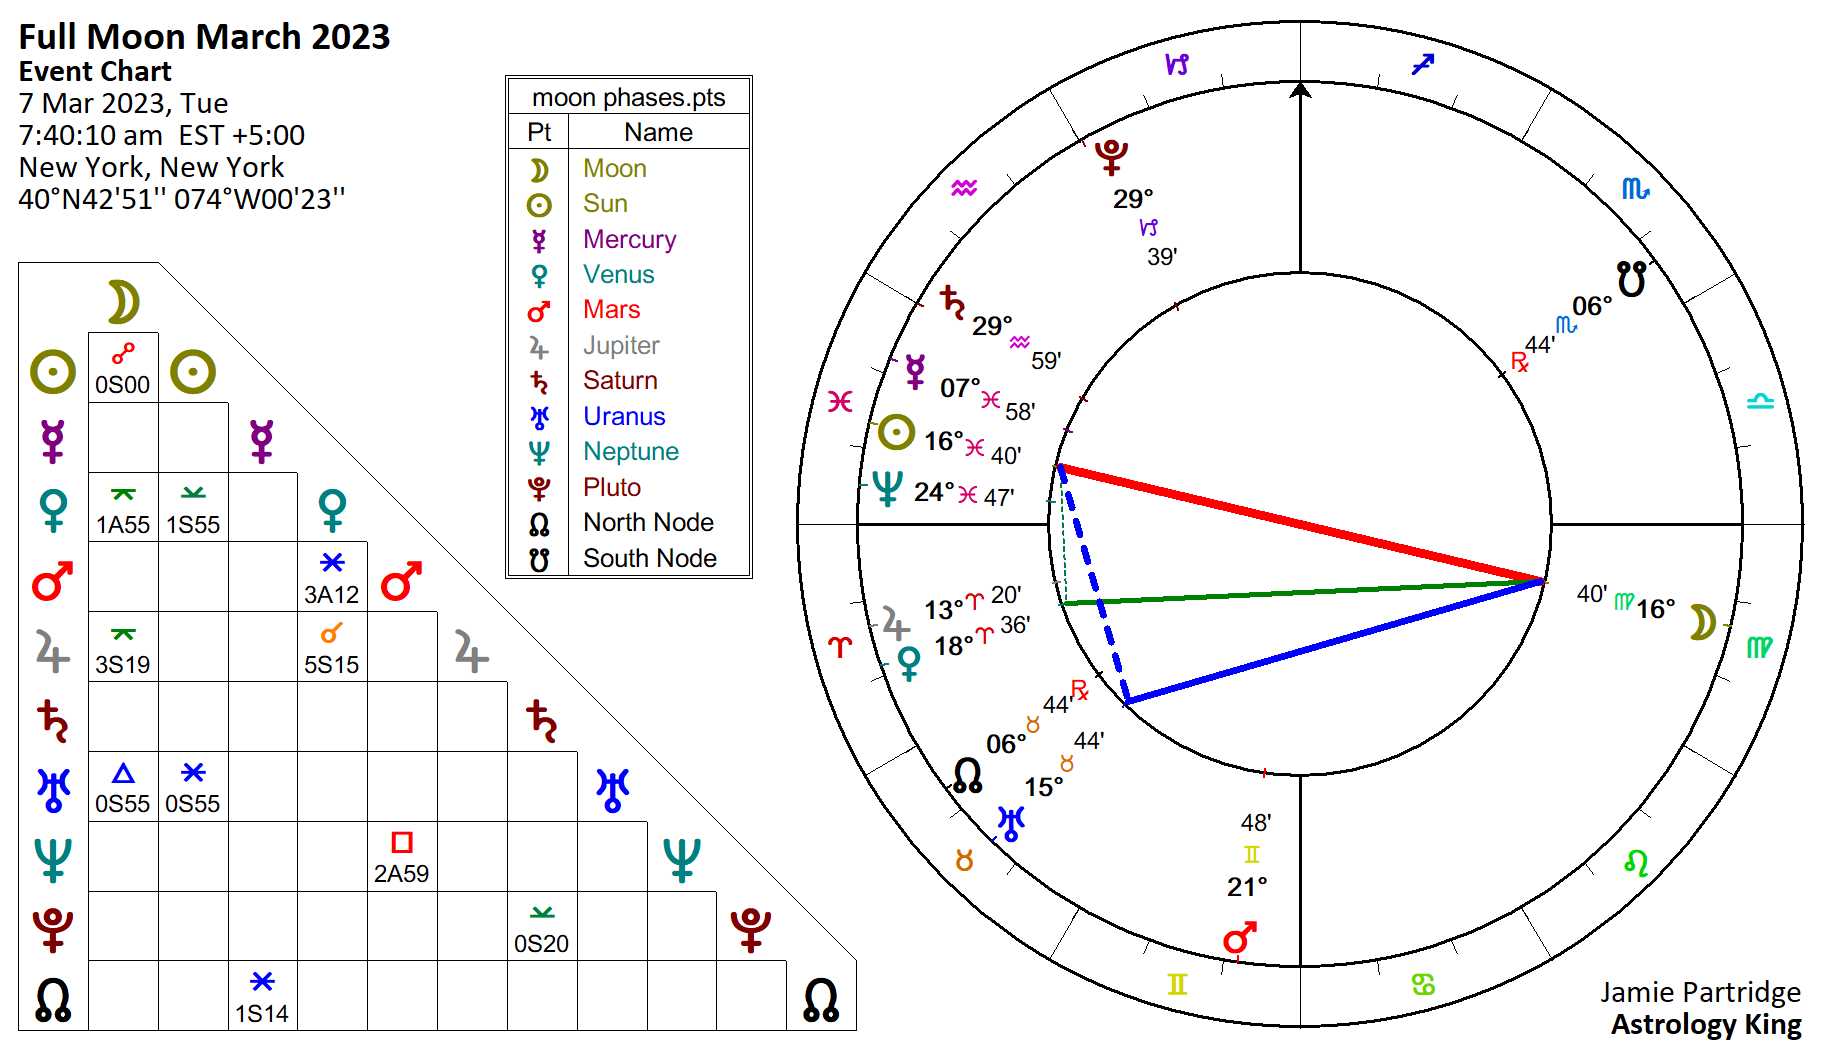 Full Moon March 2023 Image Change Astrology King